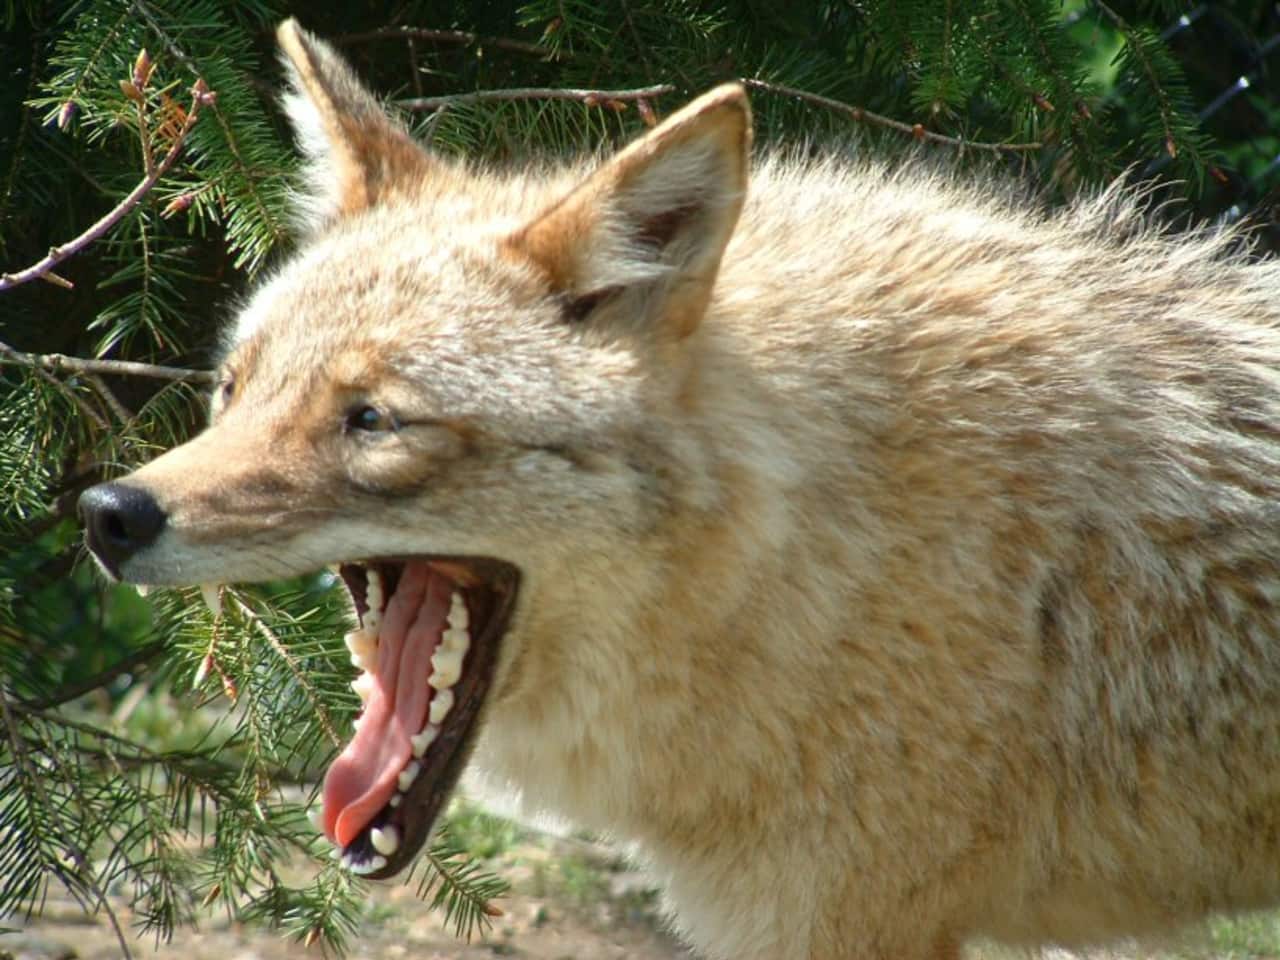 Mamaroneck Mayor Norman Rosenblum renewed his calls for tighter controls over wildlife on Thursday after an overnight attack by a coyote on deer in the village's Shore Acres neighborhood.